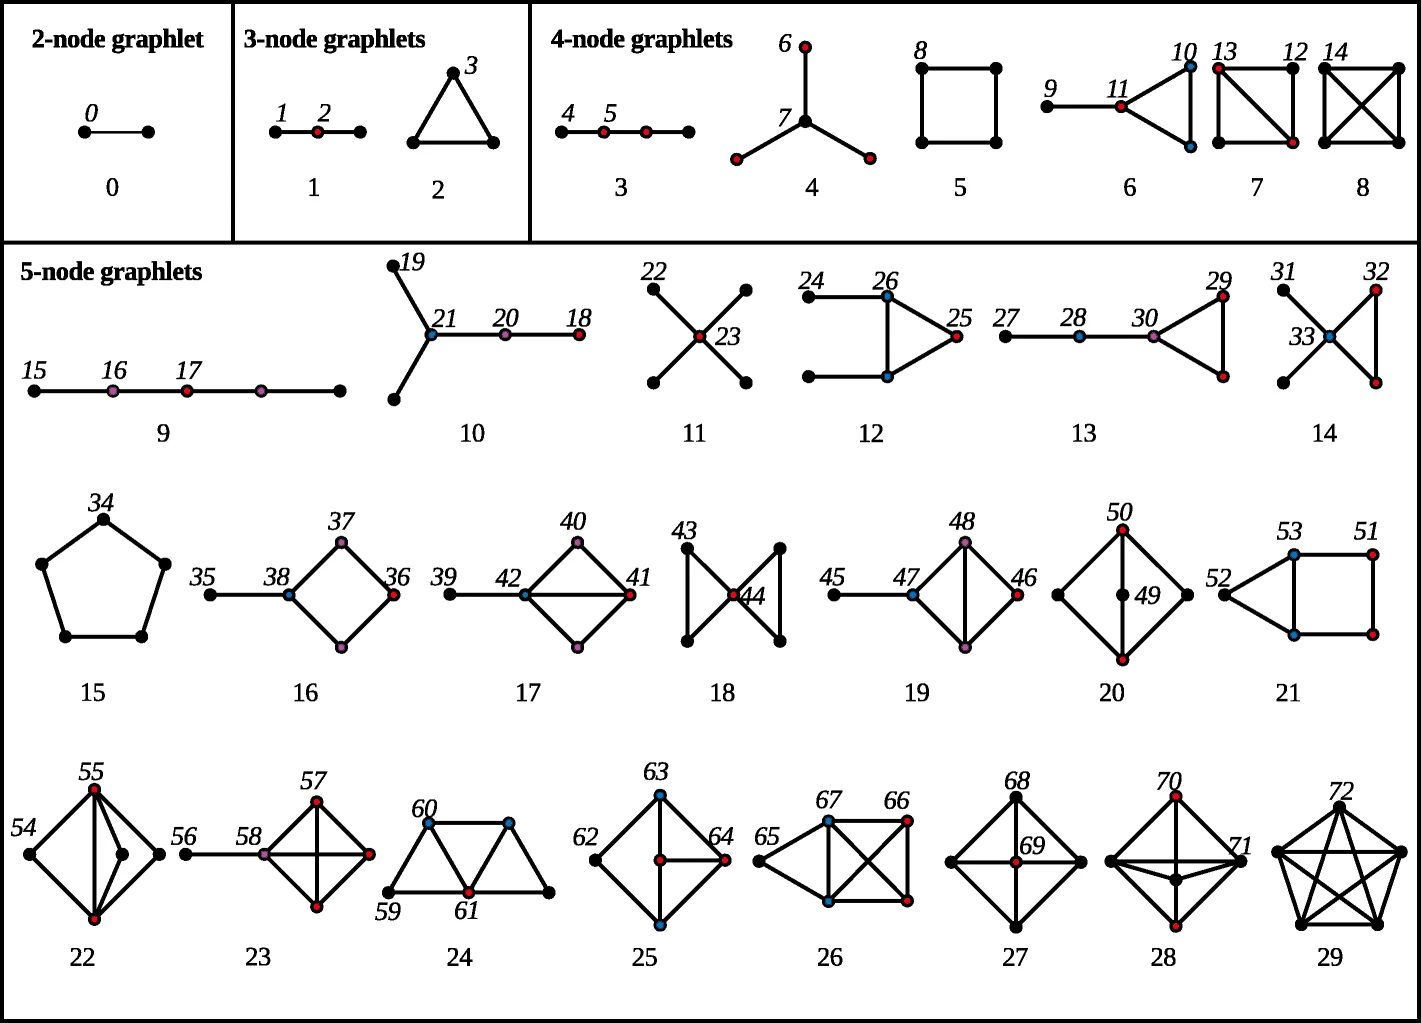 Graphlet automorphisms for 2, 3, 4, and 5 nodes (from Melckenbeeck et al. 2019)